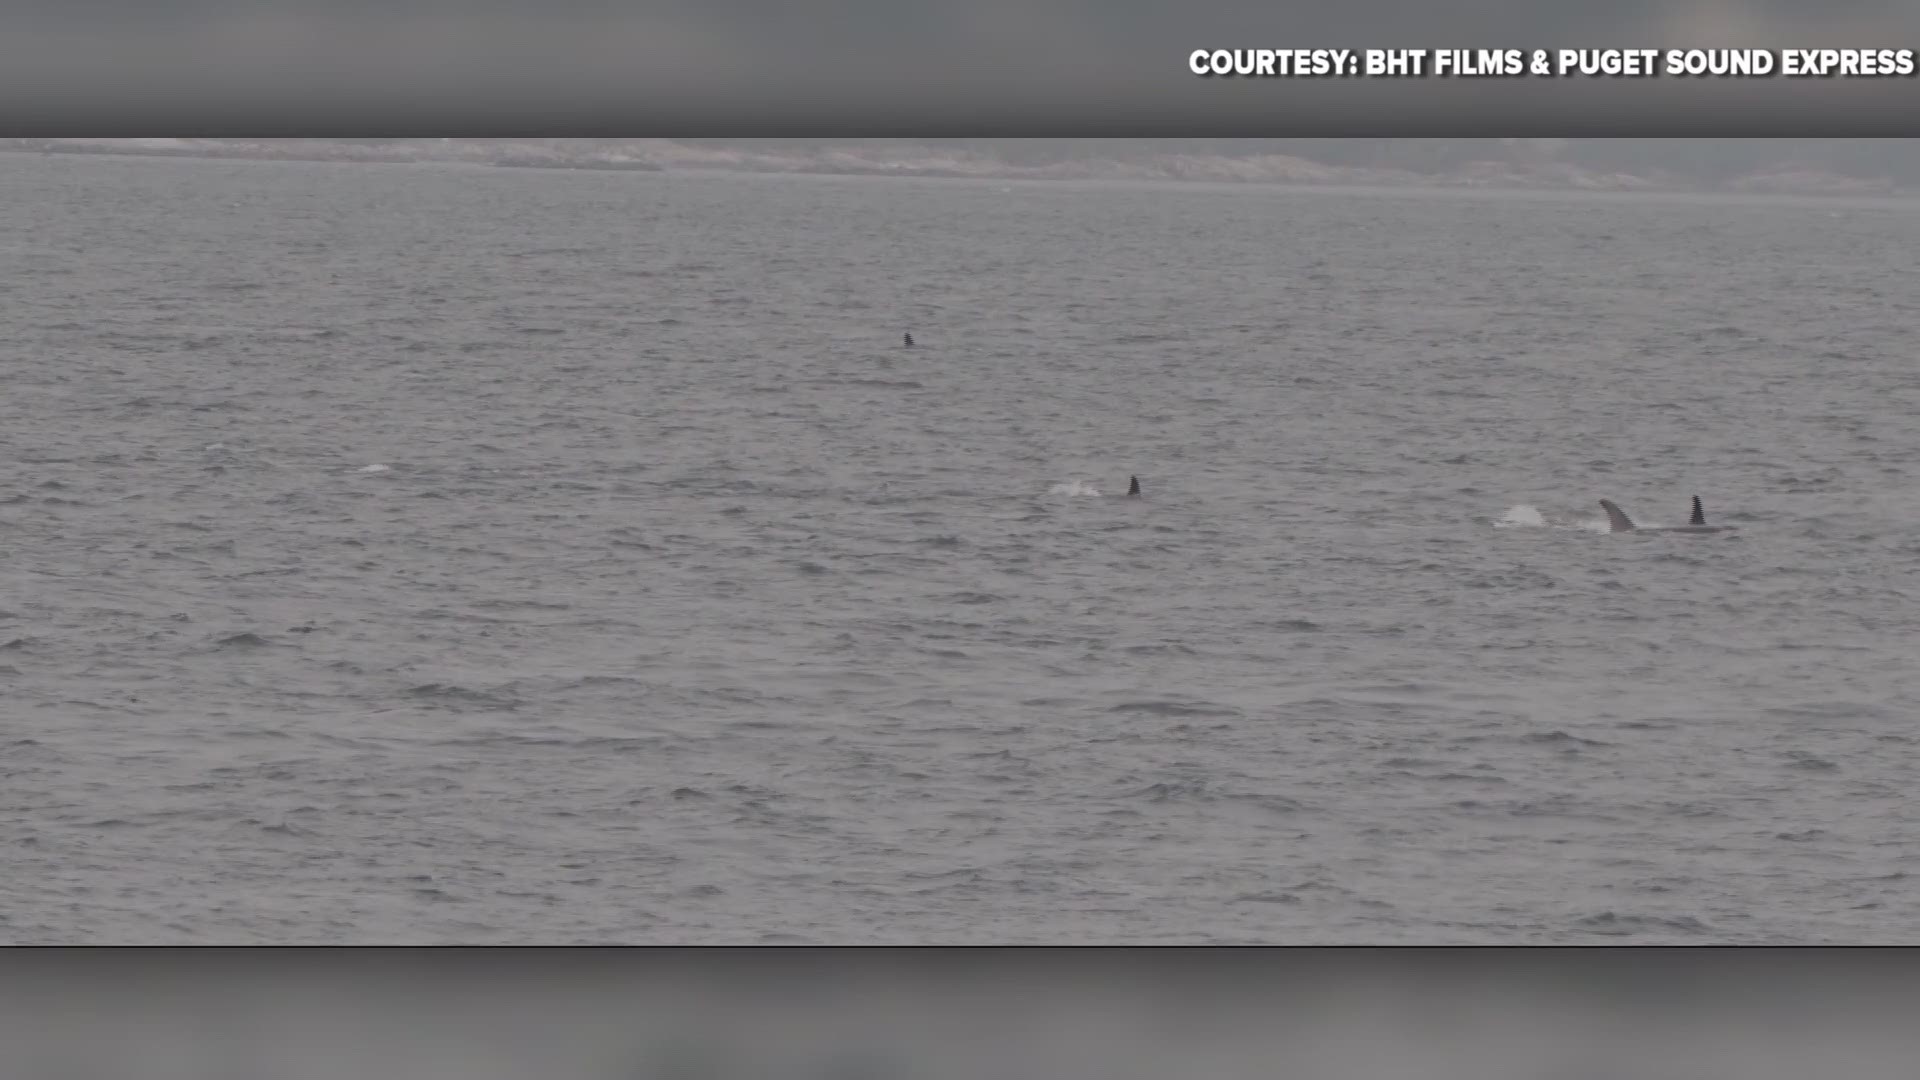 A group of whale watchers saw a rare moment when three Southern Resident orca pods came together Thursday near Victoria, B.C.